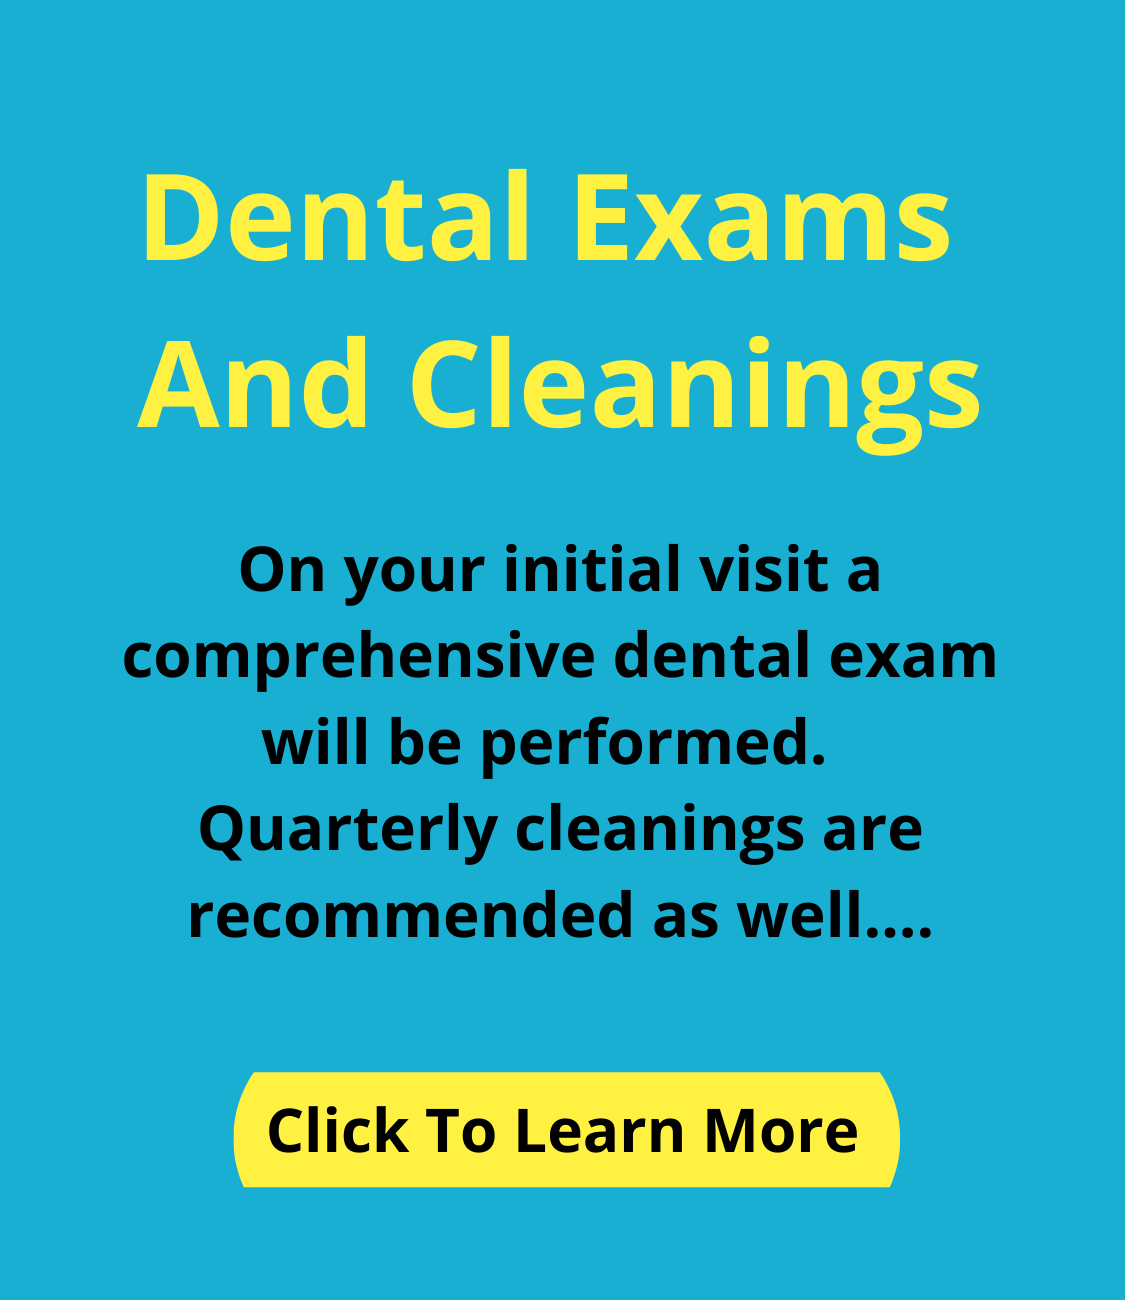 Dental Exams And Cleanings